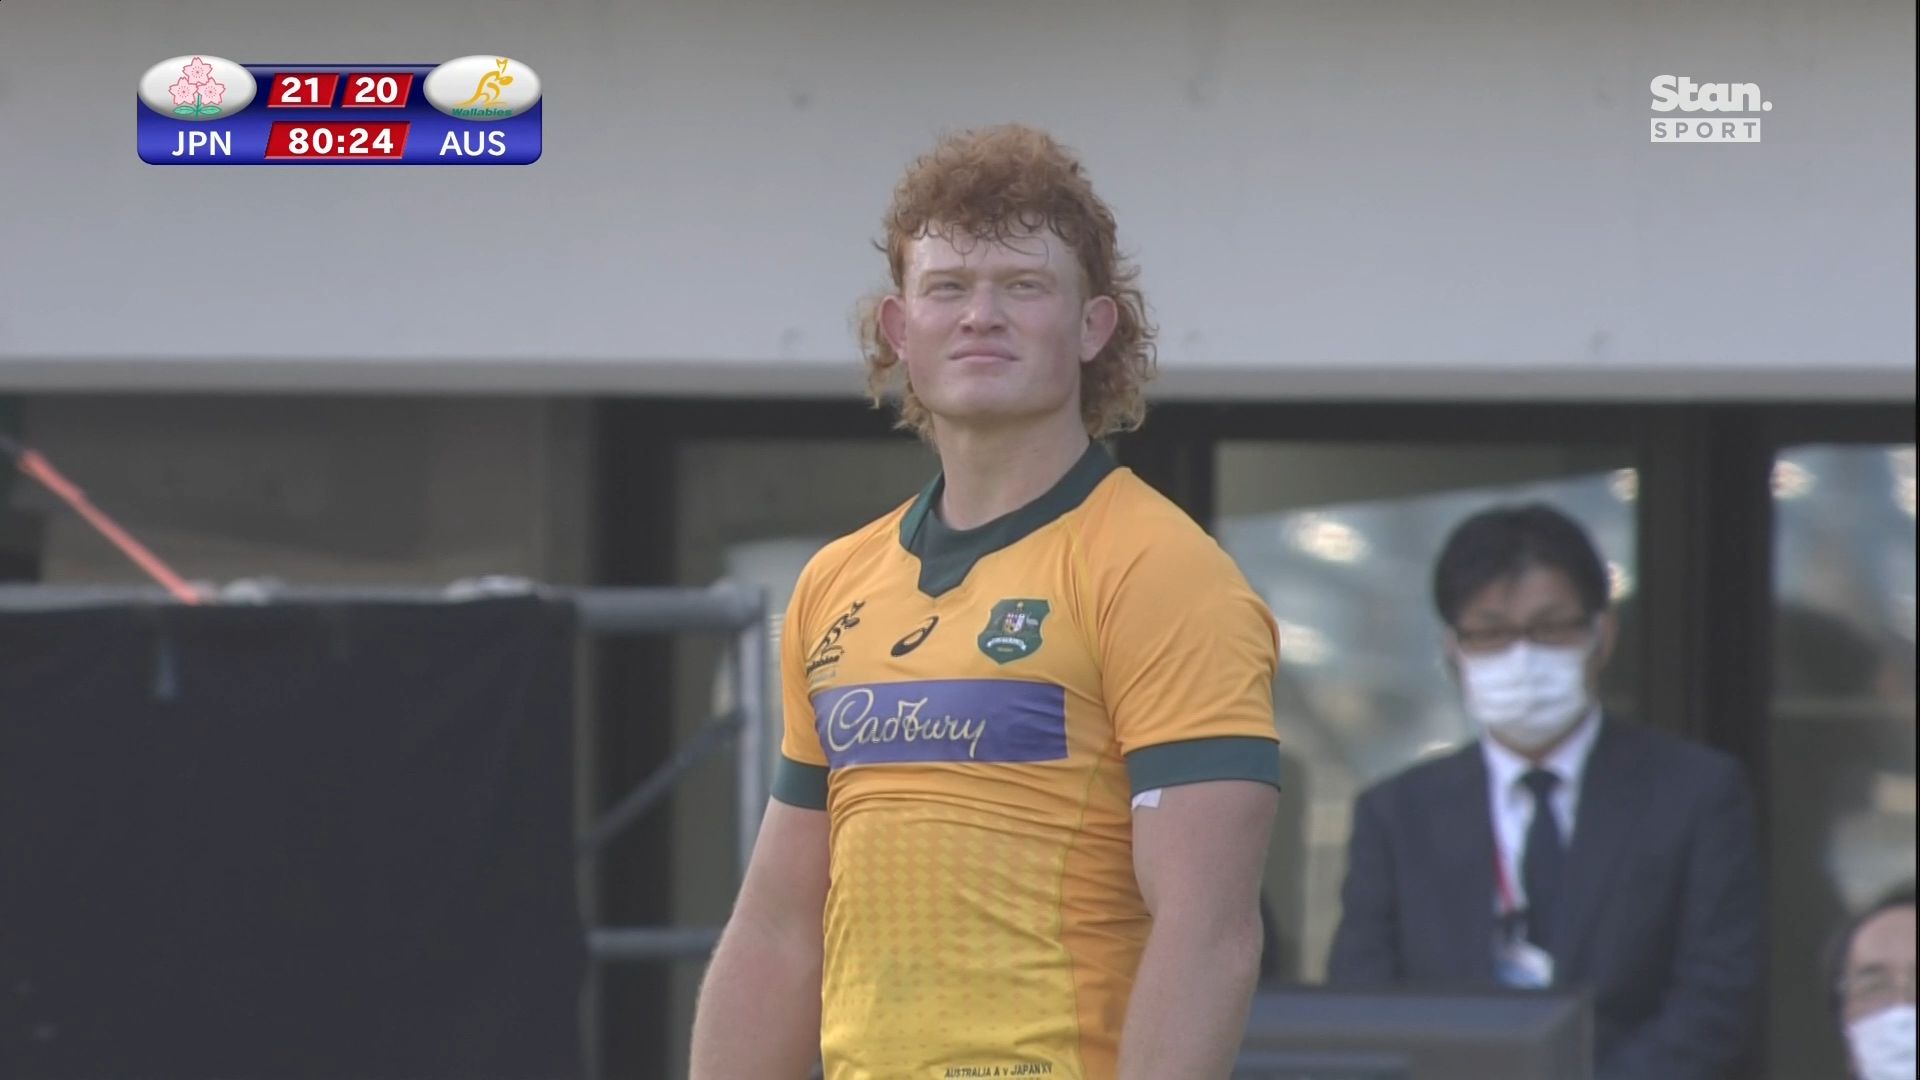 Clutch Tane Edmed kick wins series for Australia A in thrilling finish against a Japan XV